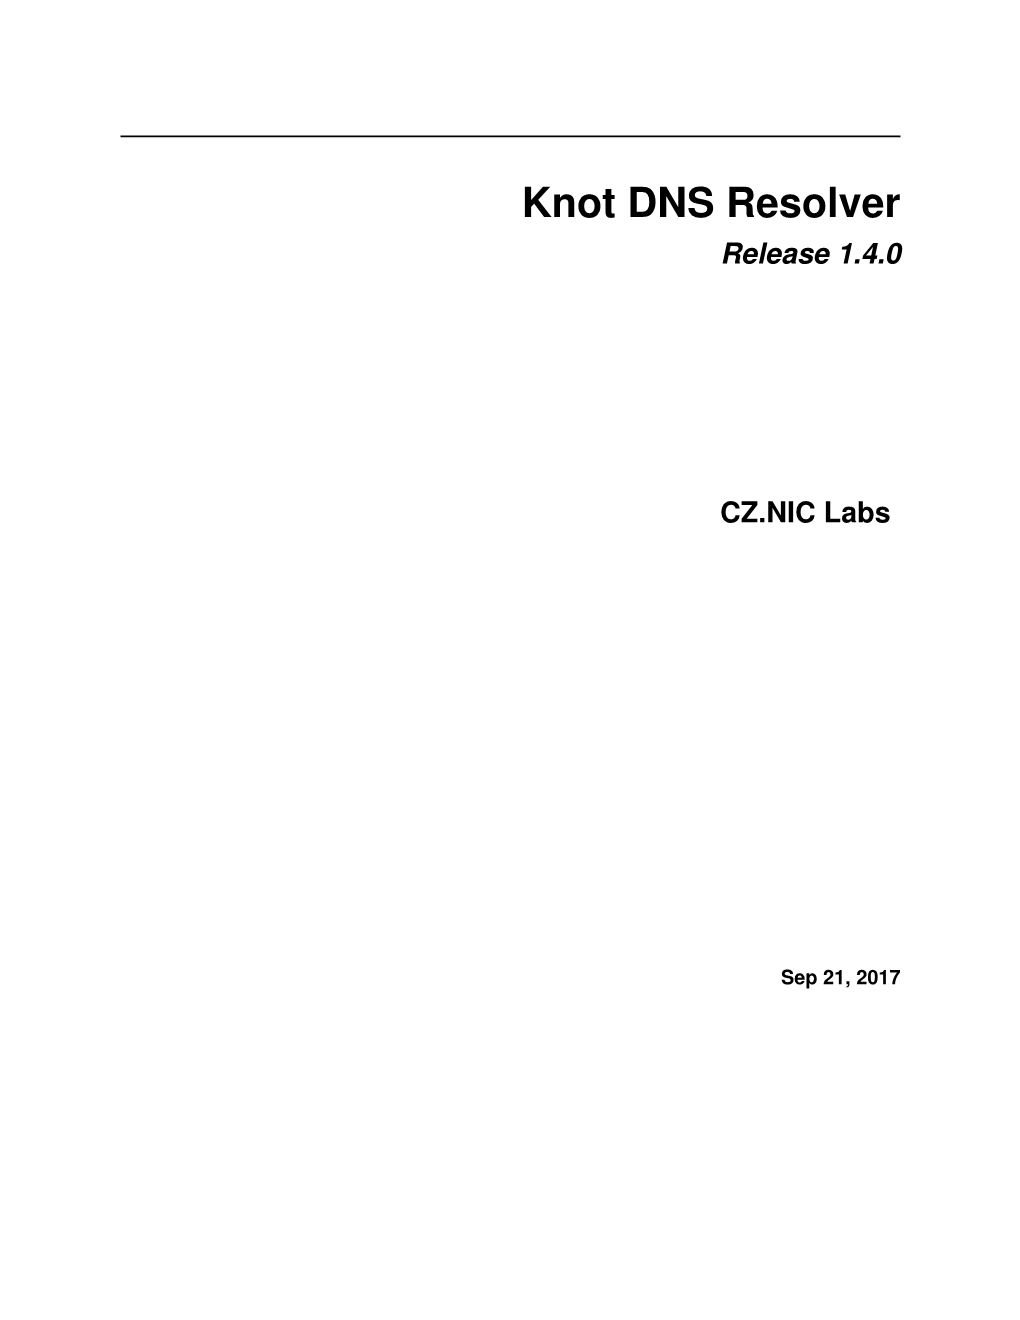 Knot DNS Resolver Release 1.4.0